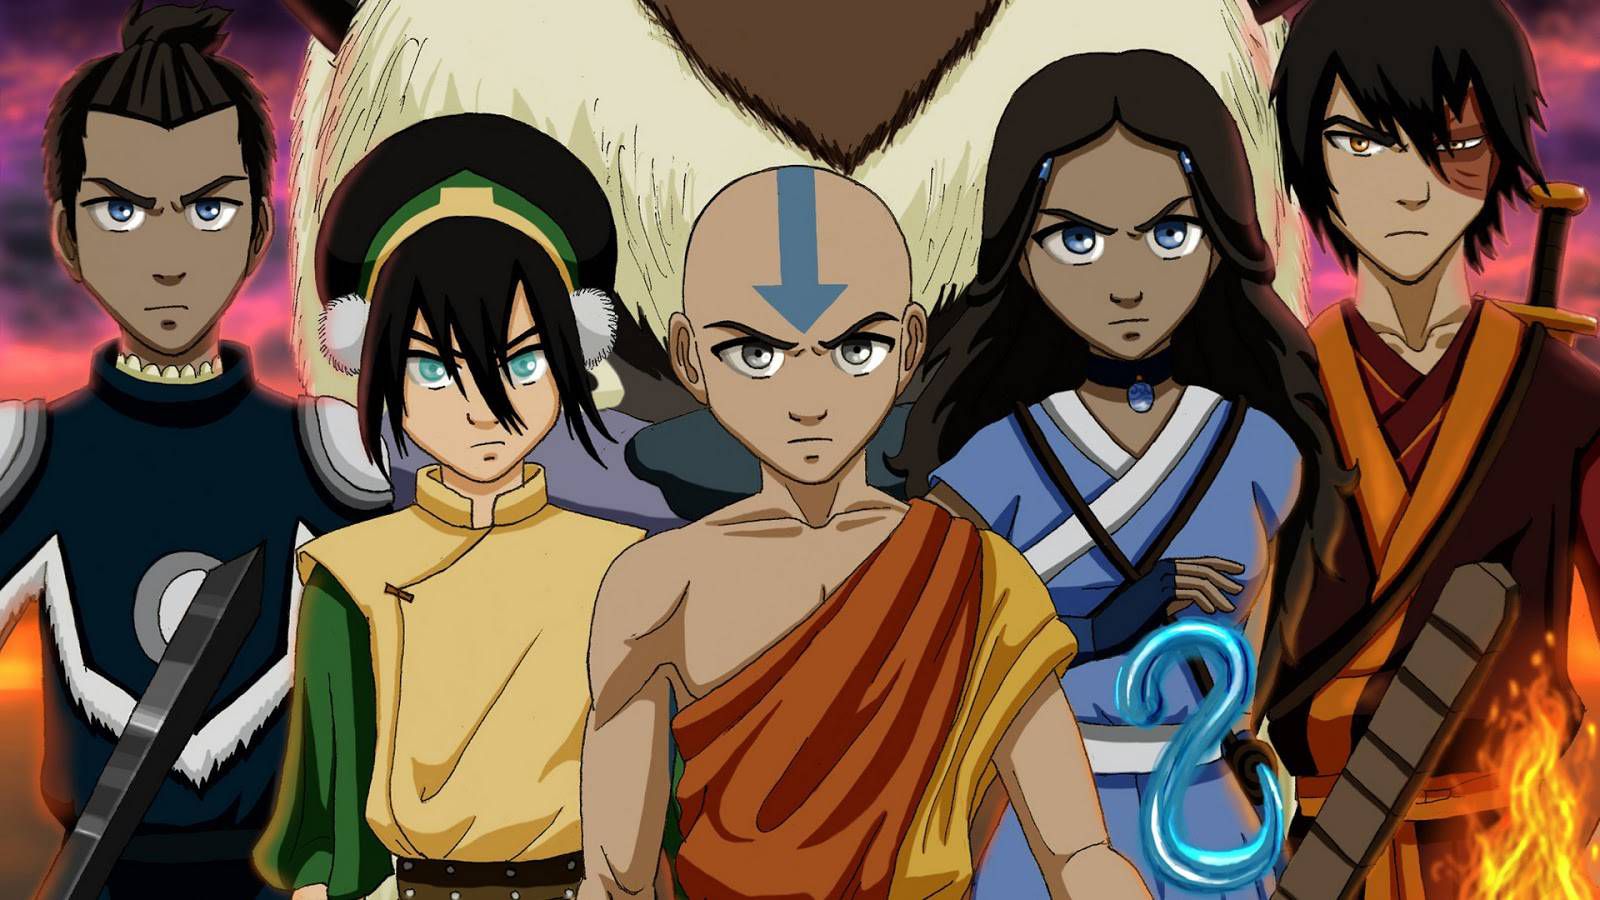 The Last Airbender, did an actor expect new Netflix ads for the cast?